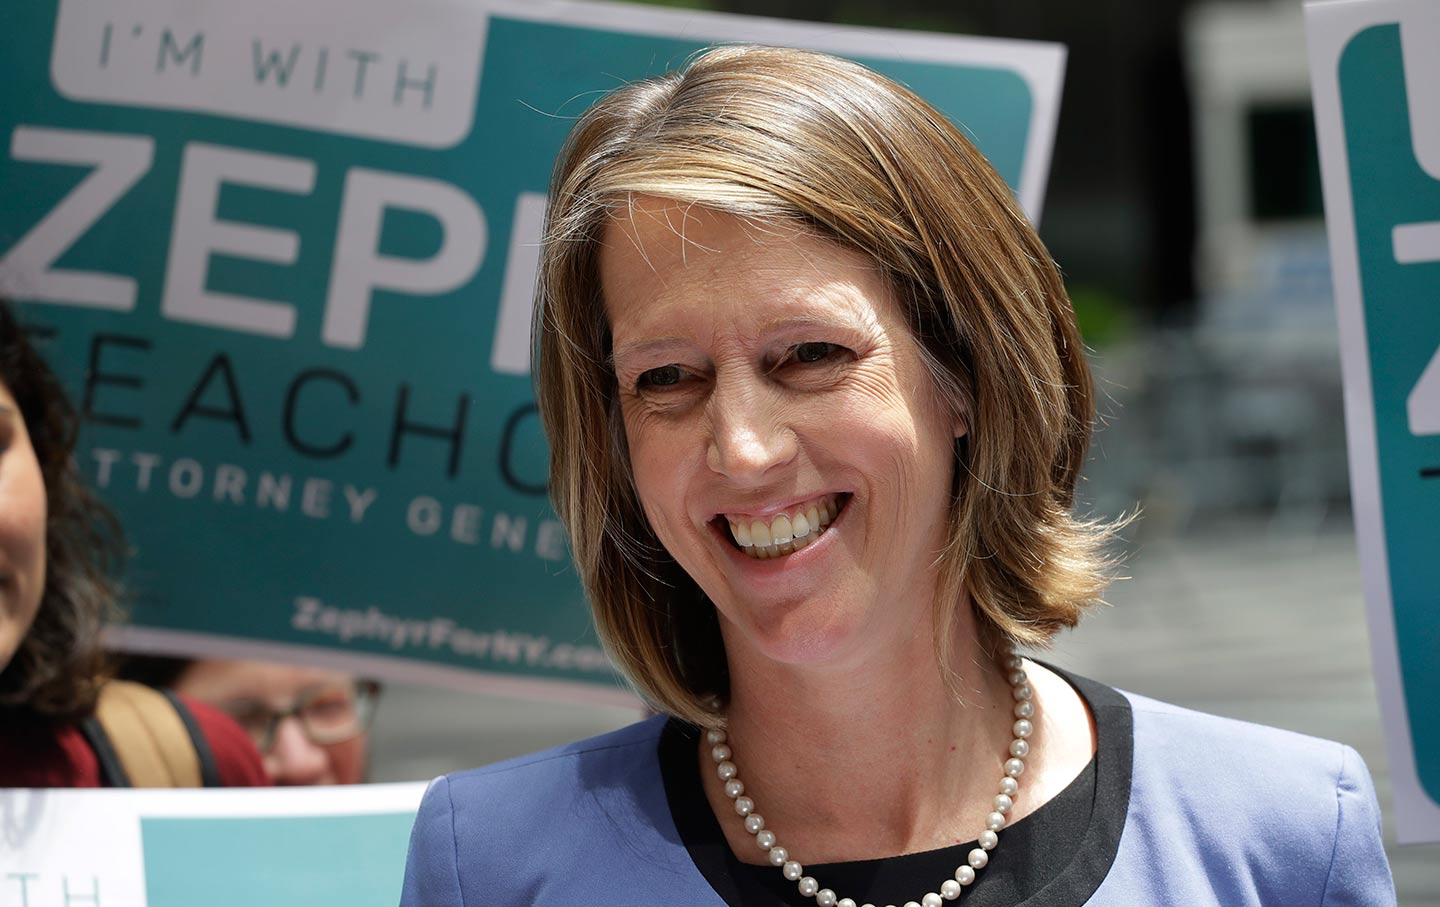 ‘The Nation’ Appoints Anti-Corruption Powerhouse Zephyr Teachout to Its Editorial Board